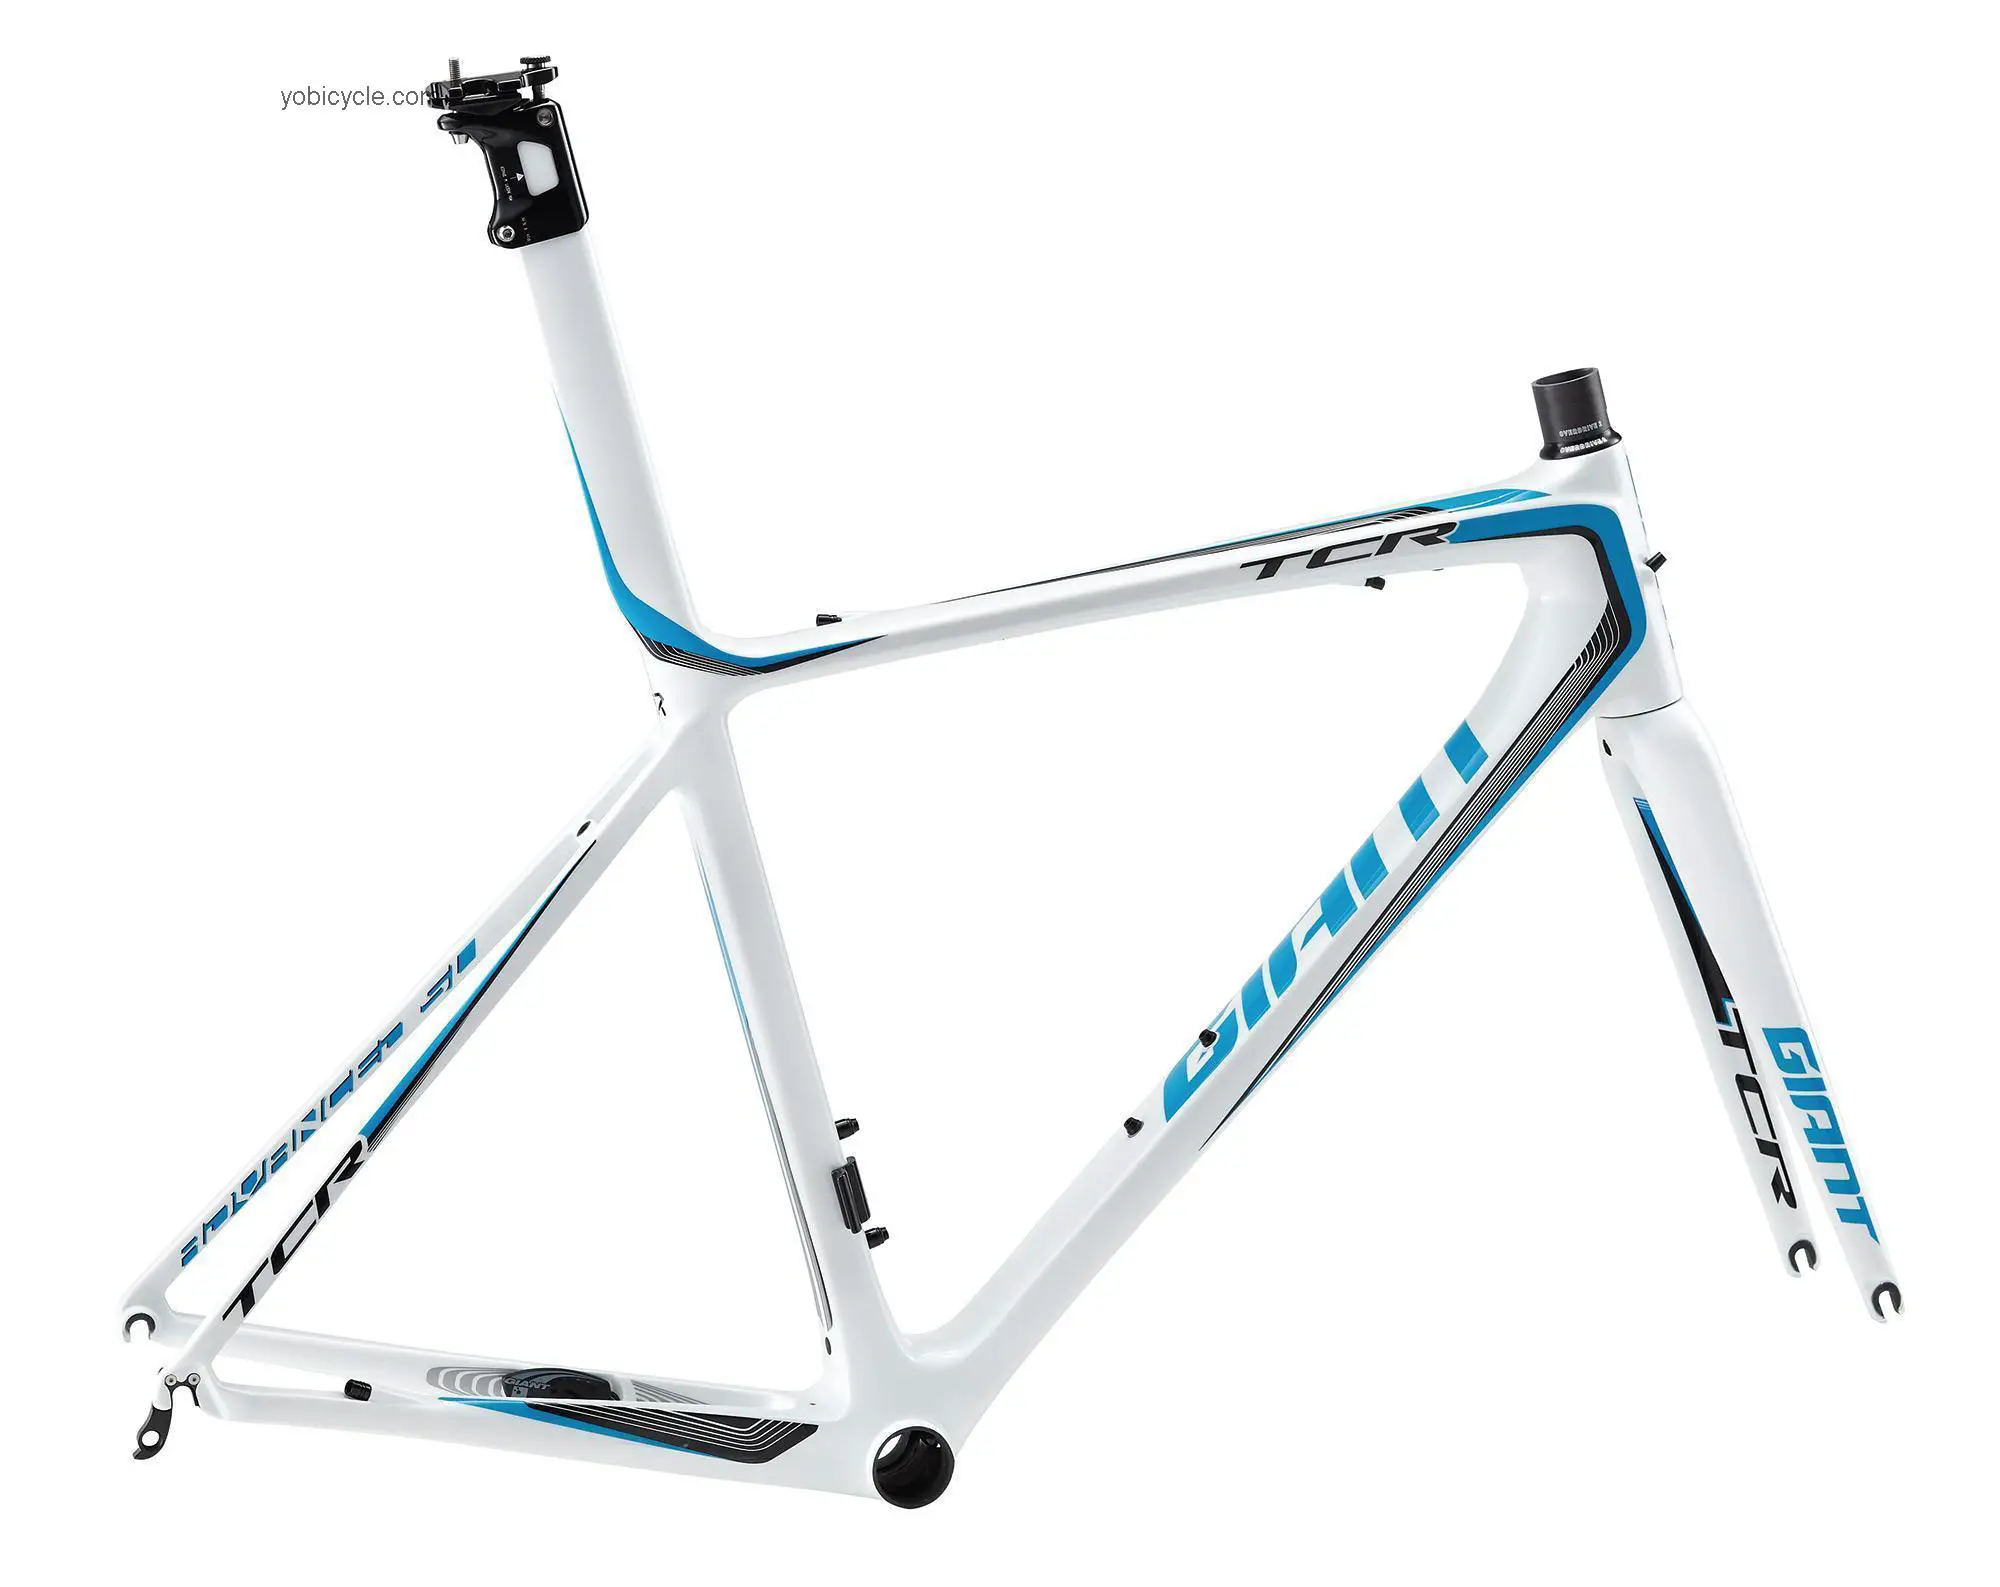 Giant  TCR Advanced SL Frameset Technical data and specifications